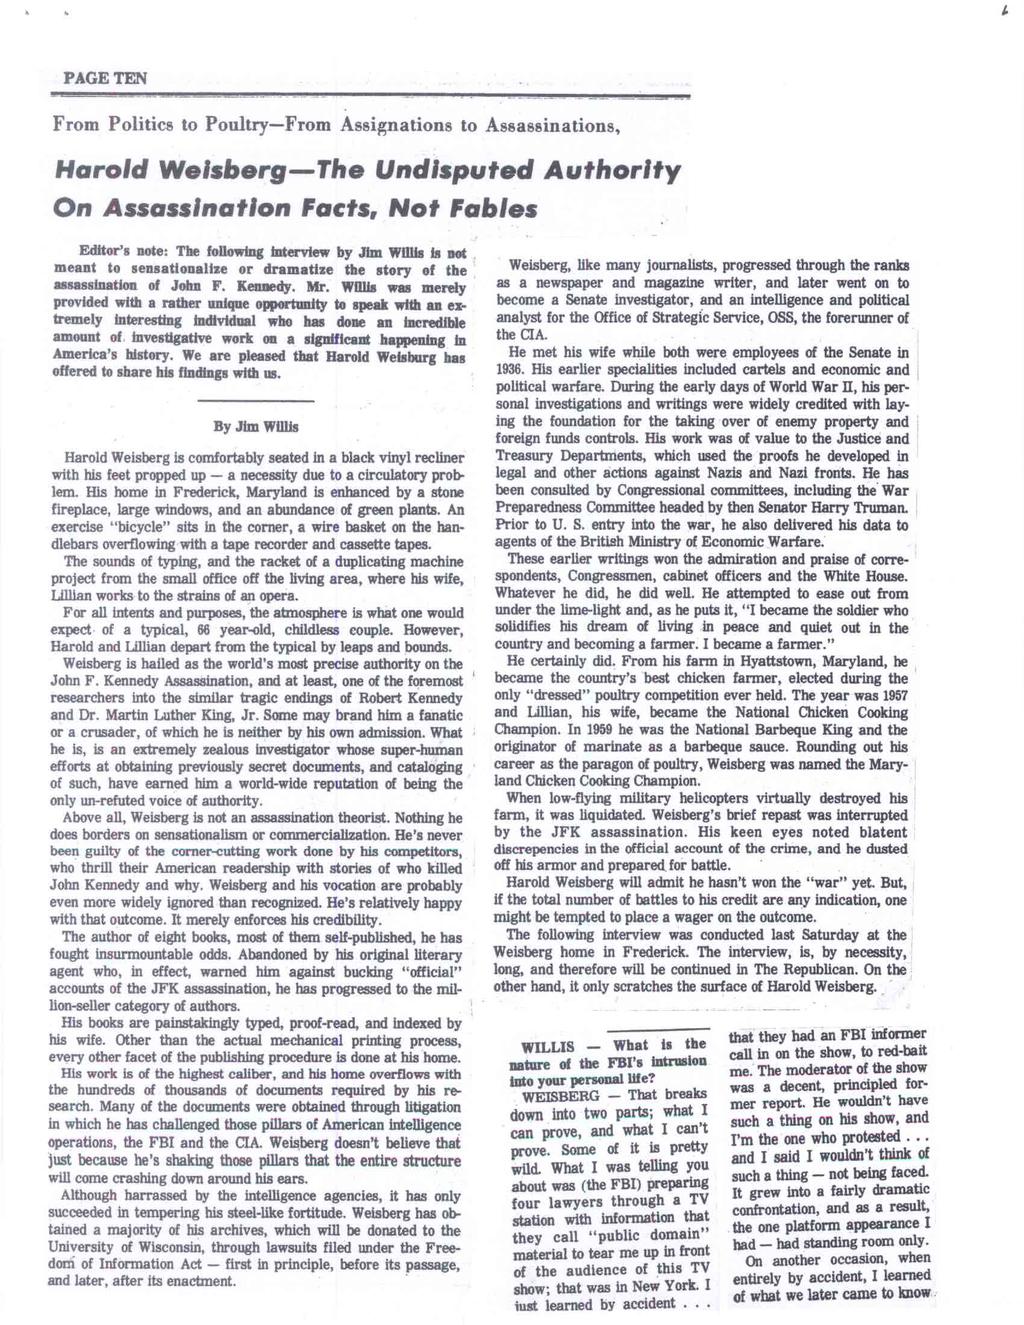 PAGE TEN From Politics to Poultry From Assignations to Assassinations, Harold Weisberg The Undisputed Authority On Assassination Facts, Not Fables Editor's note: The following Interview by Jim Willis